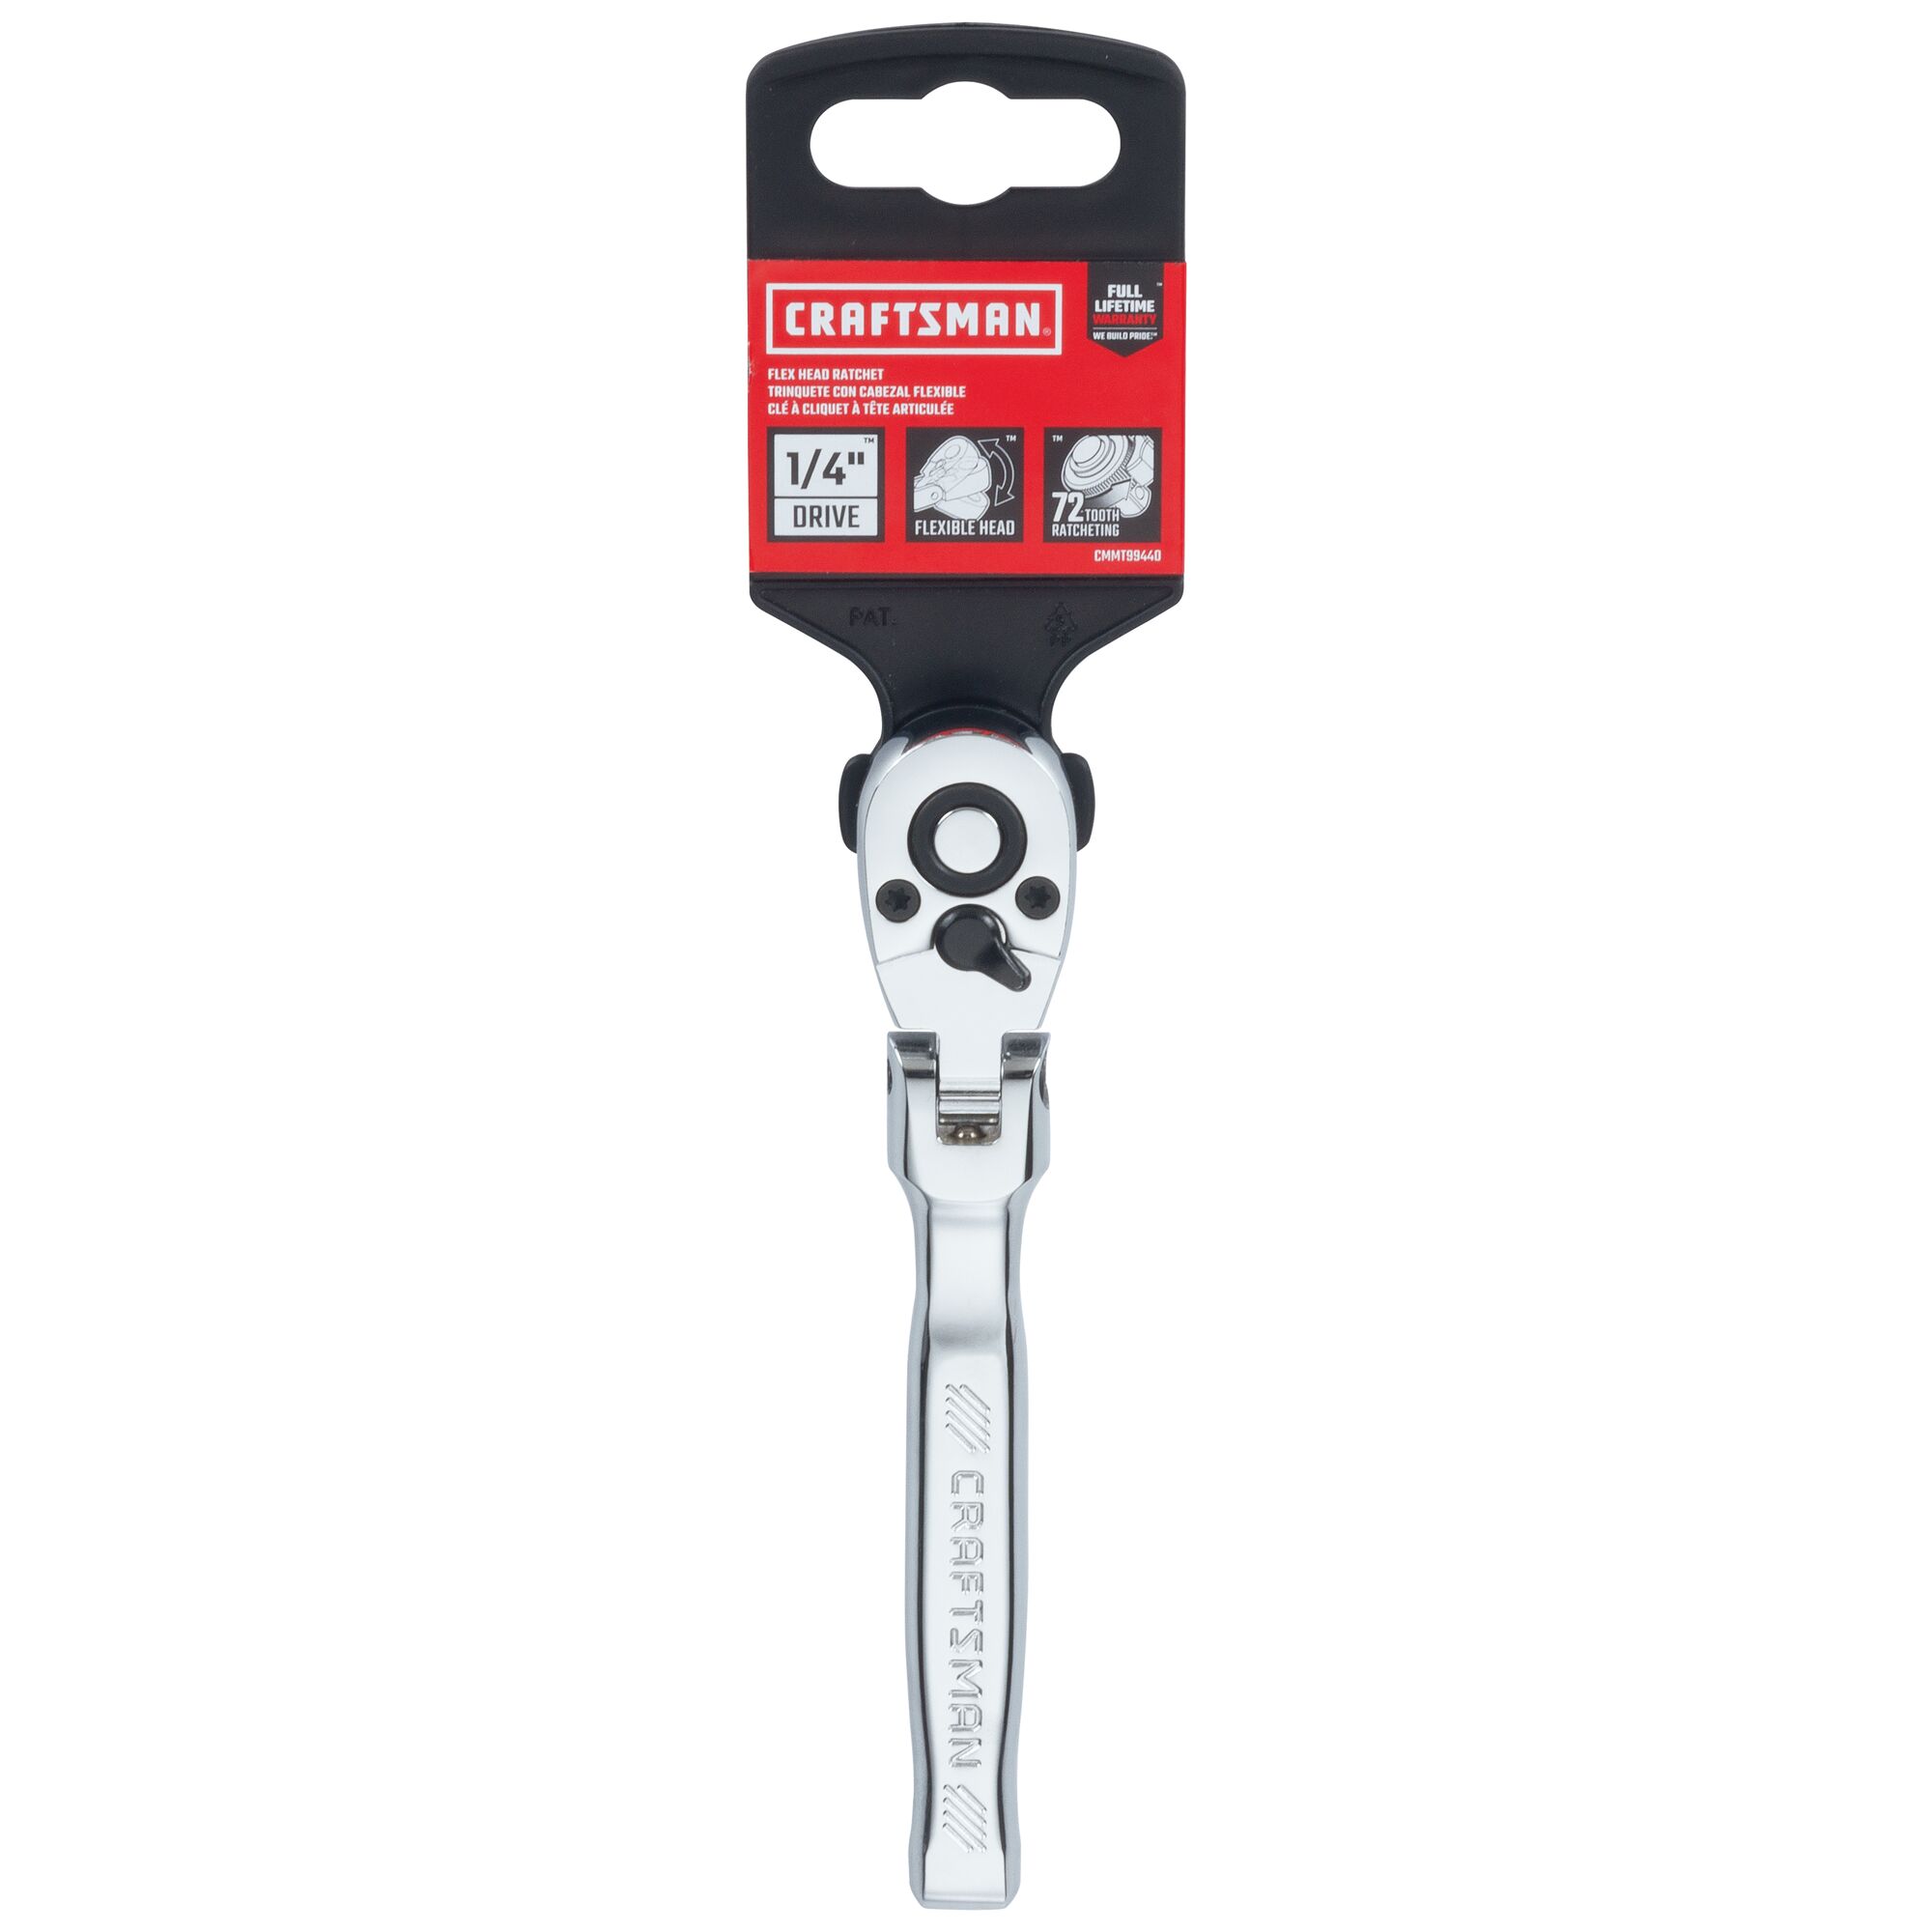 Quarter inch drive flex head ratchet with packaging tag.